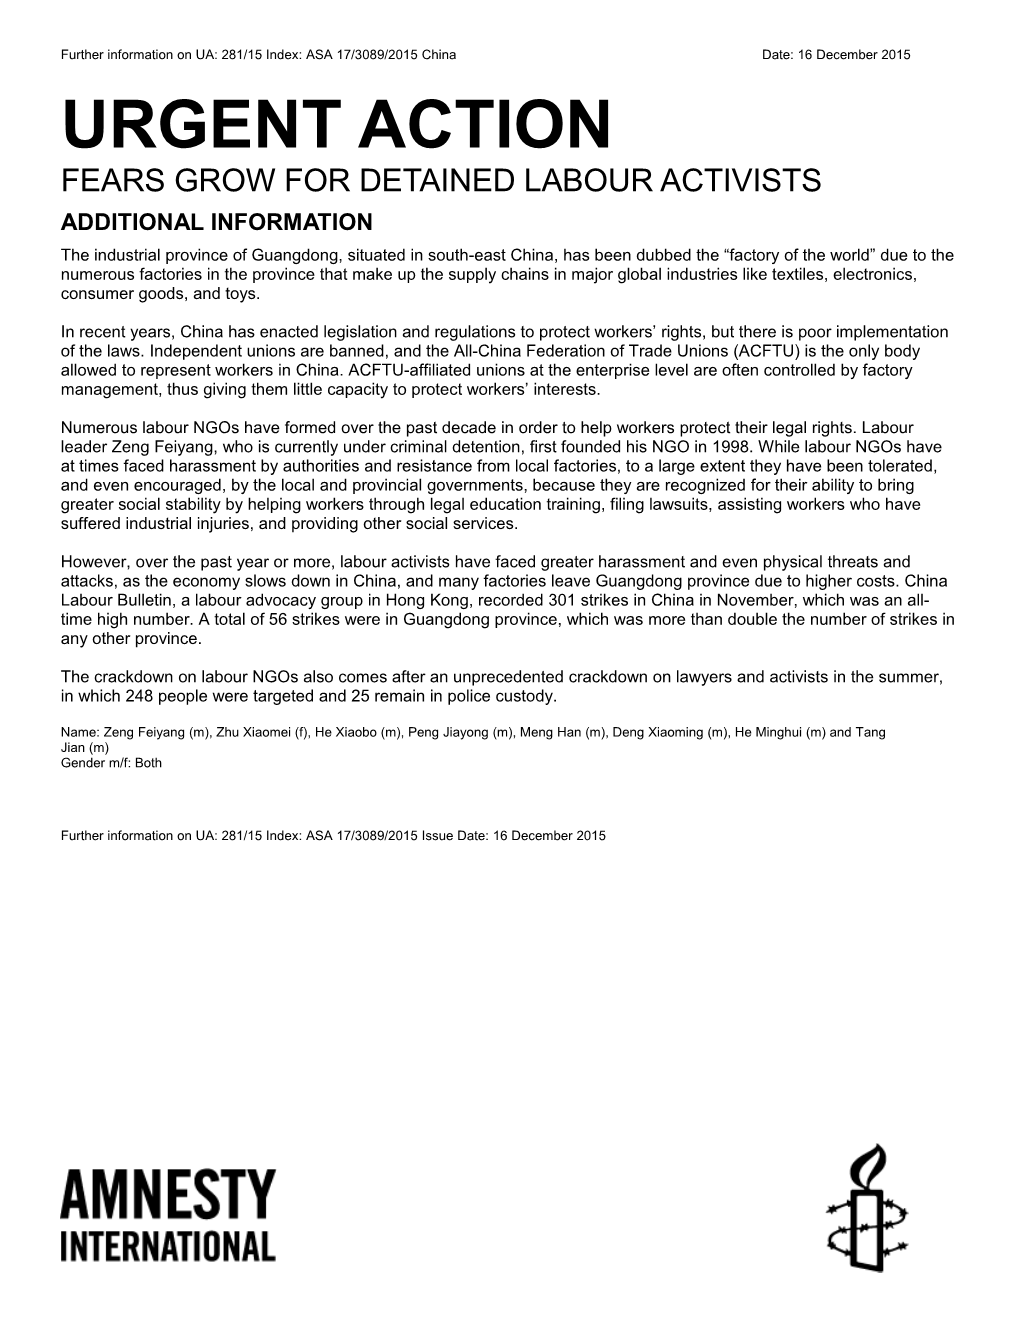 Fears Grow for Detained Labour Activists